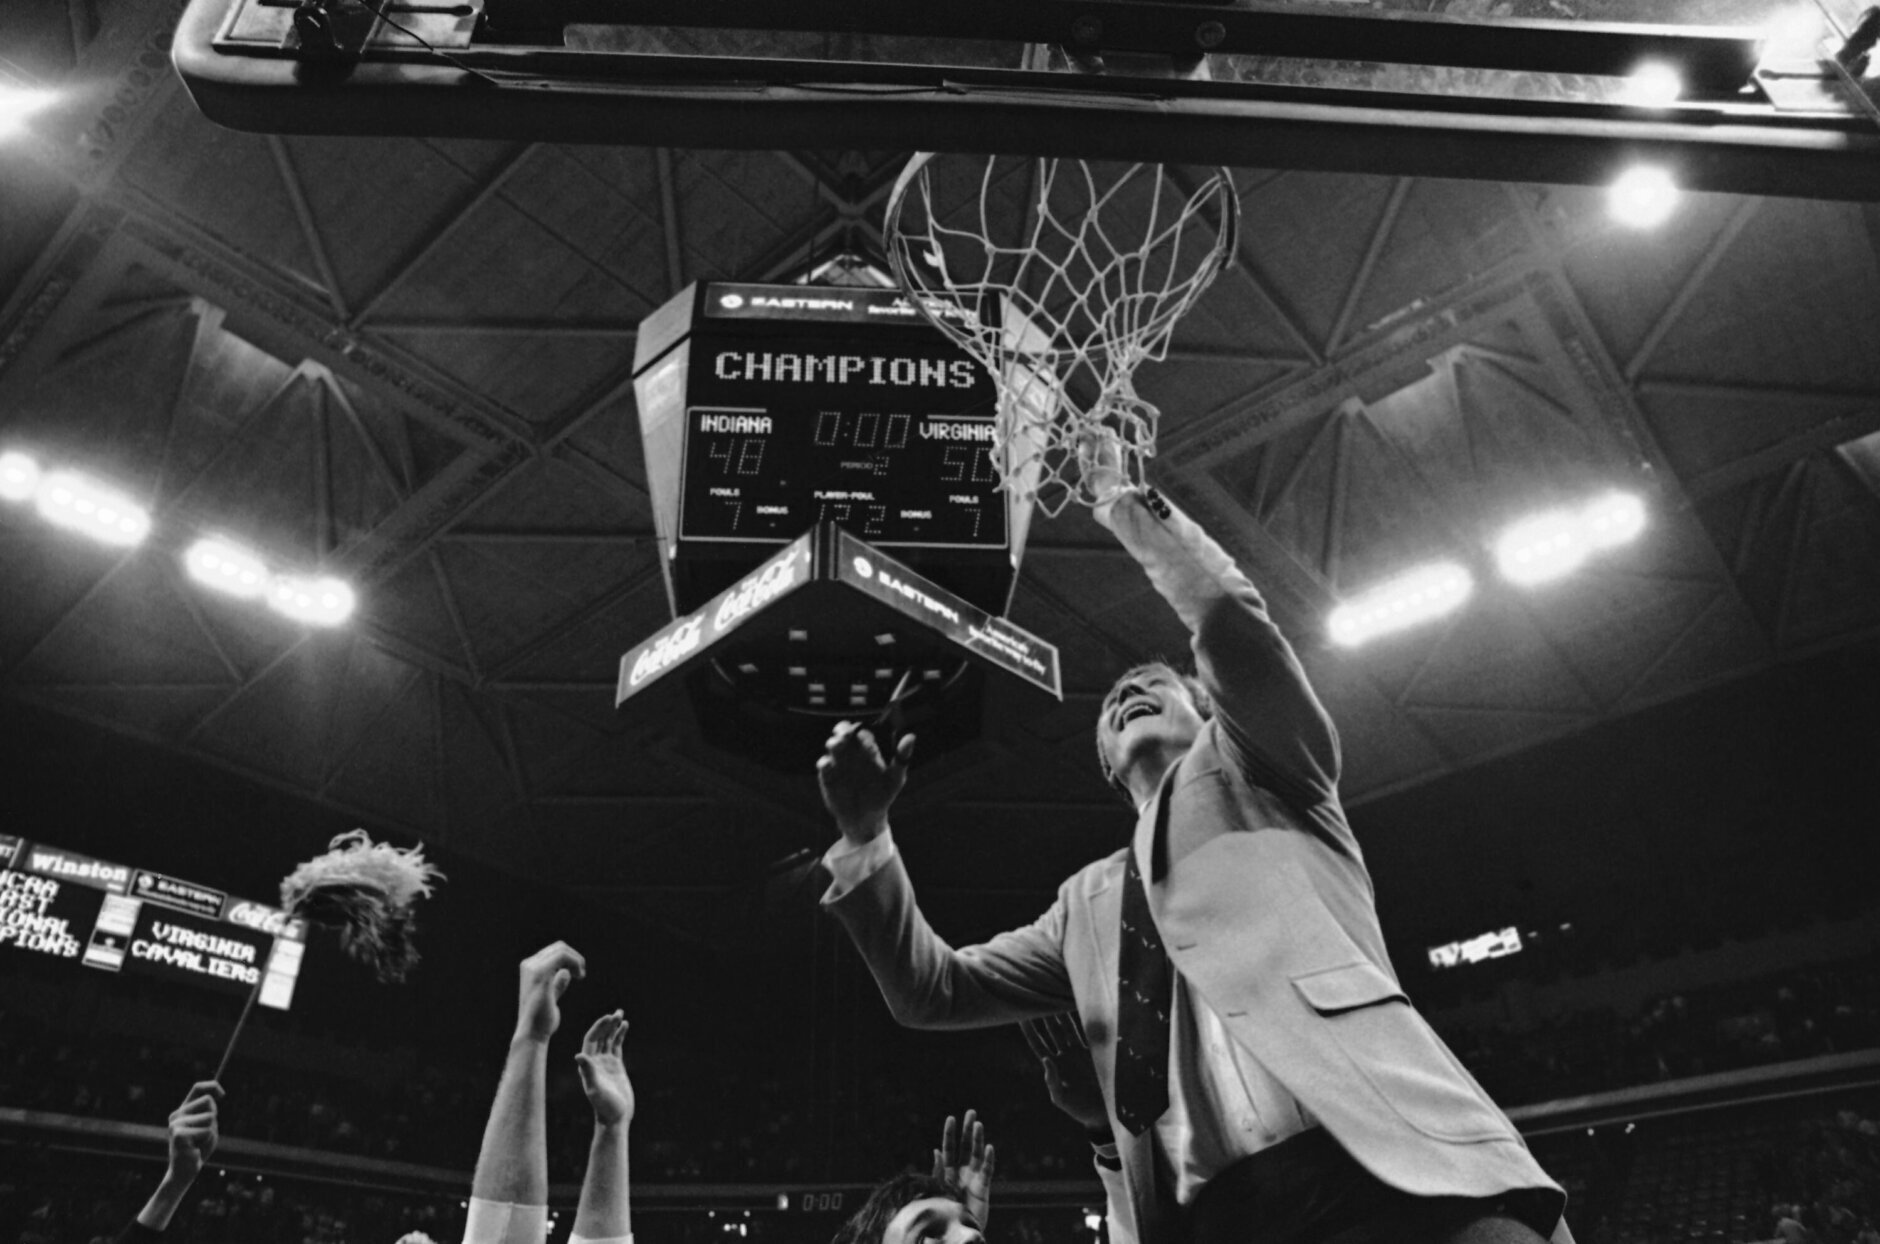 University of Virginia coach Terry Holland cuts the net from the goal with the scoreboard showing his team defeating Indiana University 50-48 in the NCAA East Regional Basketball Finals, Saturday, March 24, 1984, Atlanta, Ga. (AP Photo)